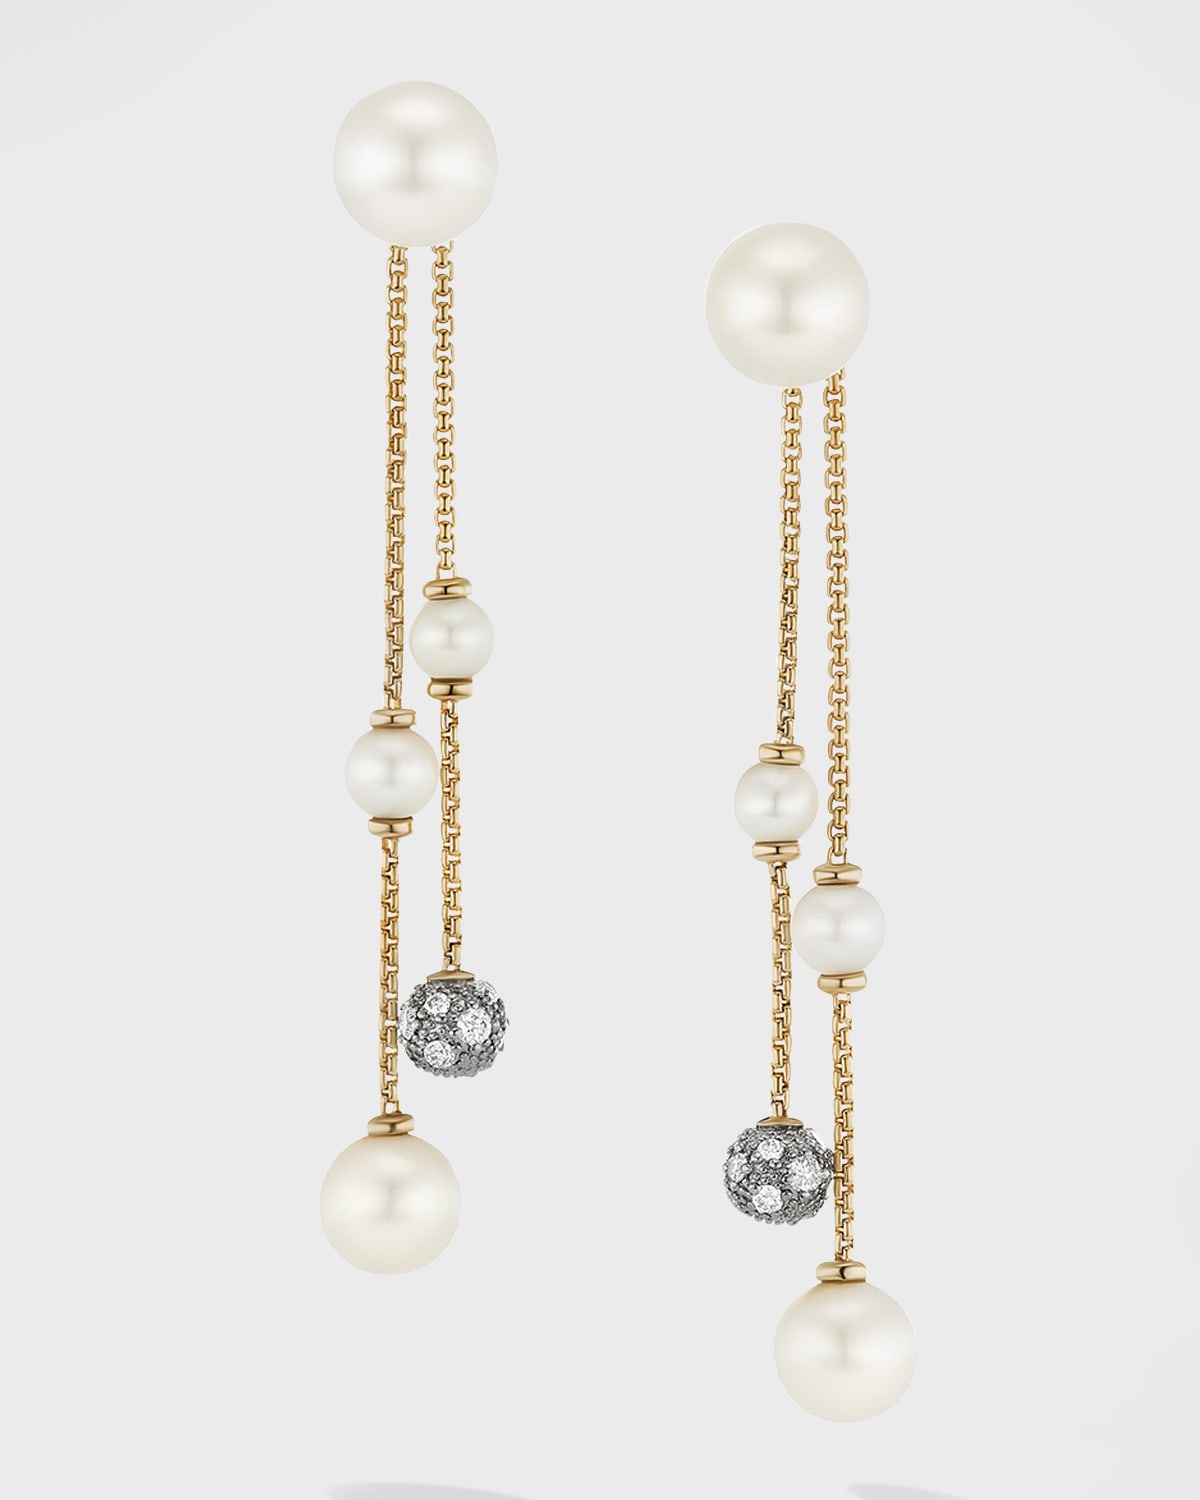 DAVID YURMAN PEARL AND PAVE TWO ROW DROP EARRINGS WITH DIAMONDS IN 18K GOLD, 8MM, 2.1"L